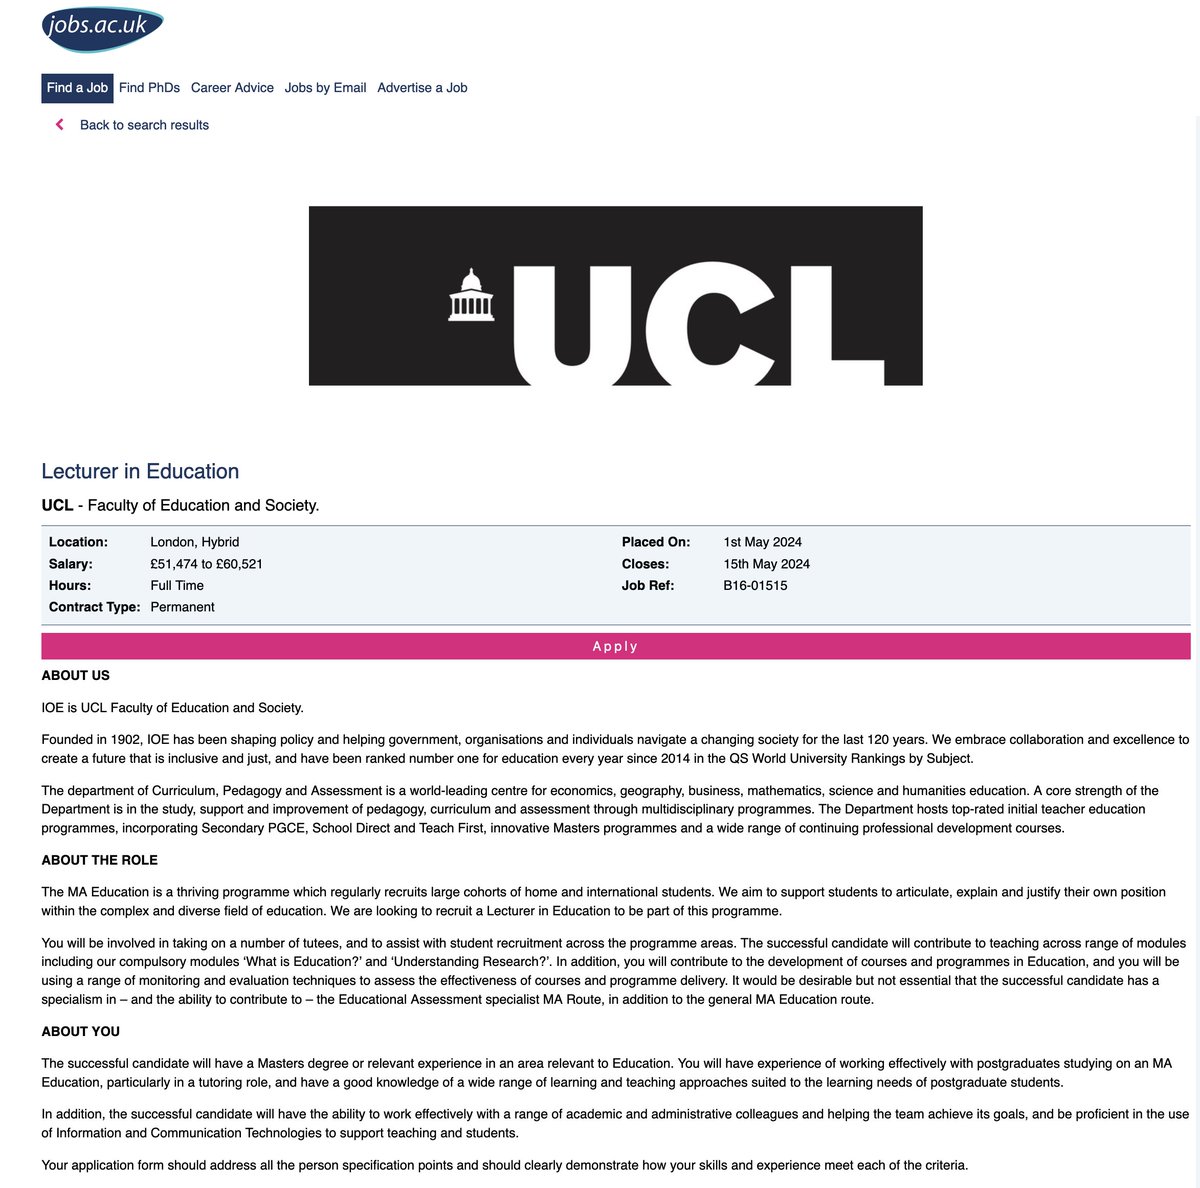 Come and work with us @IOE_London, 1st in the world for Education in the QS university rankings again this year (for the 11th year in a row) on our outstanding MA Education programme? jobs.ac.uk/job/DHL139/lec…